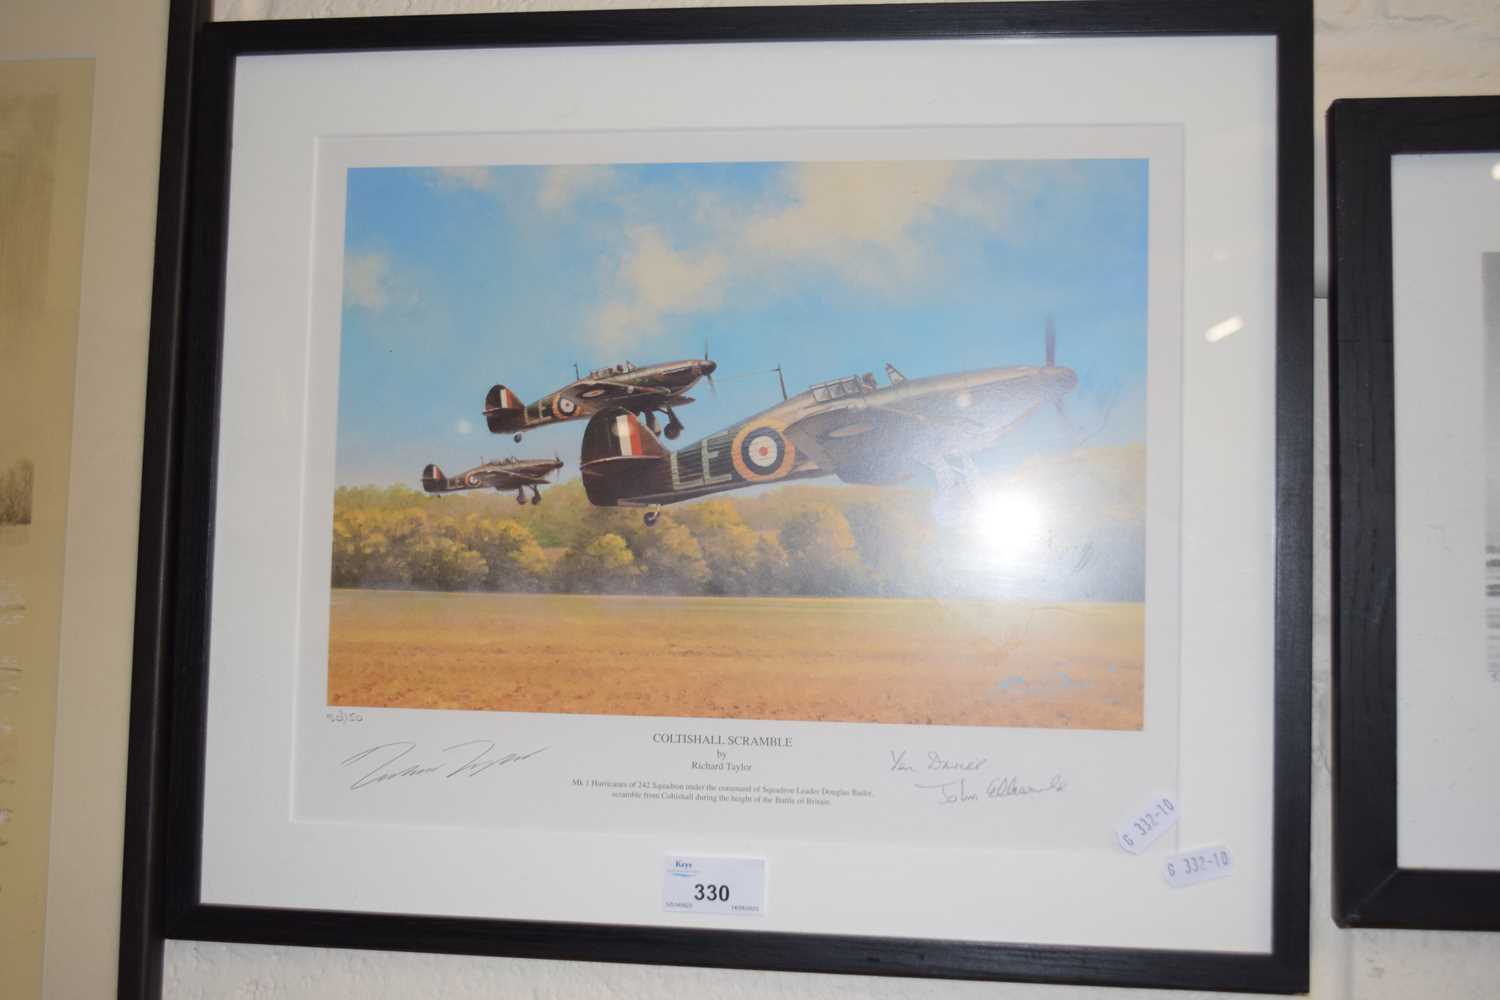 Richard Taylor, Coltishall Scramble, coloured print number 50 of 150, signed multiple times in